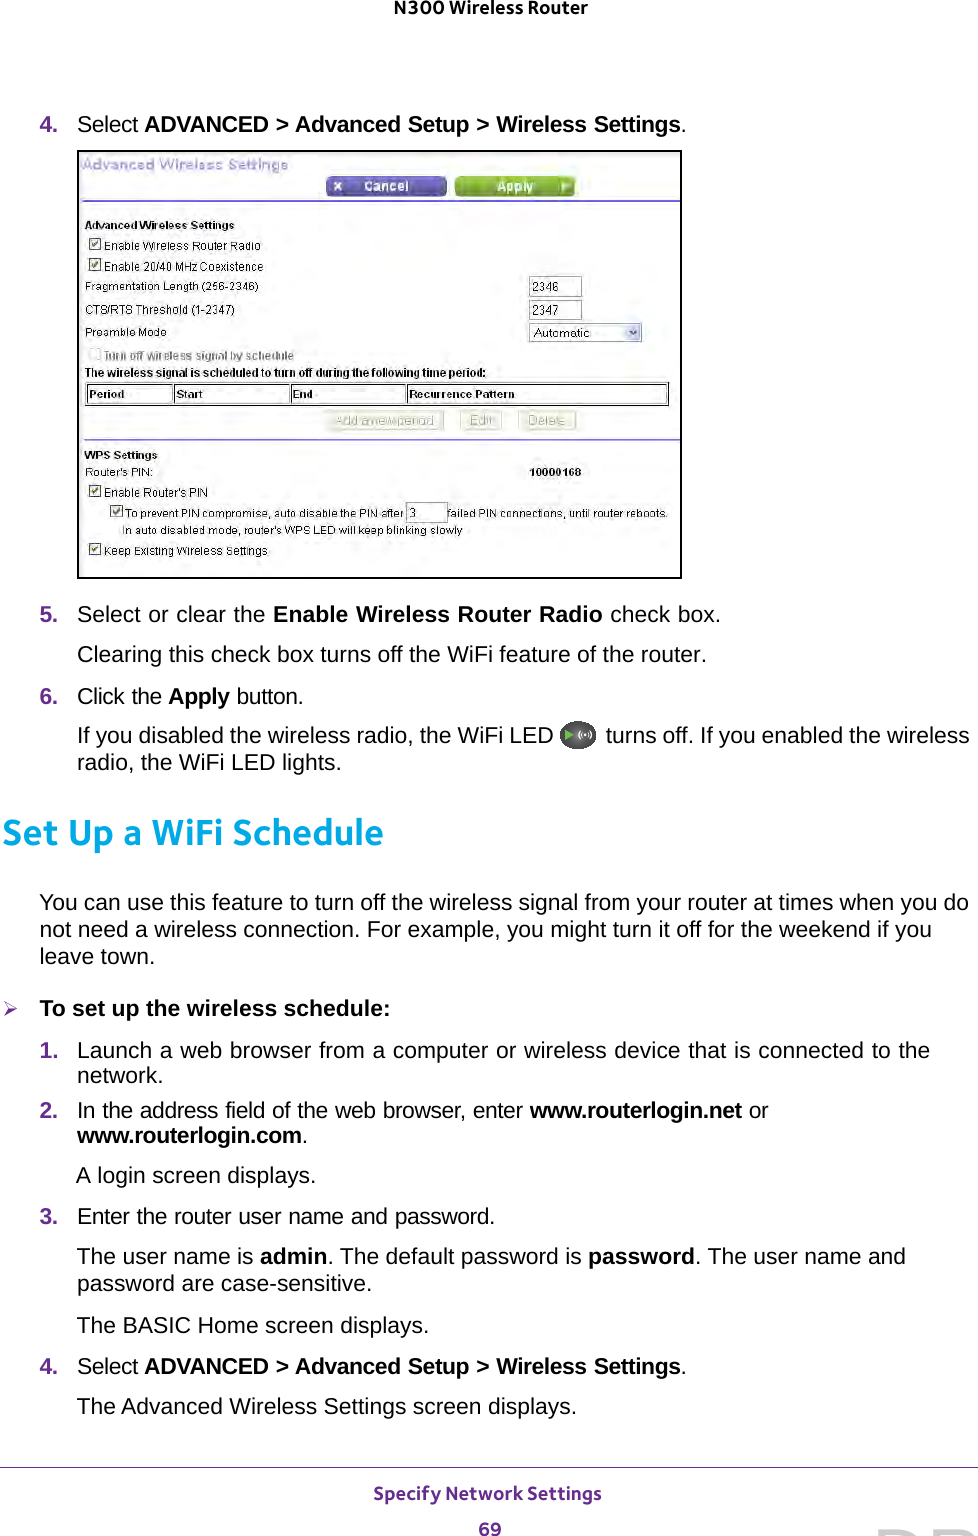 Specify Network Settings 69 N300 Wireless Router4.  Select ADVANCED &gt; Advanced Setup &gt; Wireless Settings.5.  Select or clear the Enable Wireless Router Radio check box.Clearing this check box turns off the WiFi feature of the router. 6.  Click the Apply button.If you disabled the wireless radio, the WiFi LED   turns off. If you enabled the wireless radio, the WiFi LED lights.Set Up a WiFi ScheduleYou can use this feature to turn off the wireless signal from your router at times when you do not need a wireless connection. For example, you might turn it off for the weekend if you leave town.To set up the wireless schedule:1.  Launch a web browser from a computer or wireless device that is connected to the network.2.  In the address field of the web browser, enter www.routerlogin.net or www.routerlogin.com.A login screen displays.3.  Enter the router user name and password.The user name is admin. The default password is password. The user name and password are case-sensitive.The BASIC Home screen displays.4.  Select ADVANCED &gt; Advanced Setup &gt; Wireless Settings.The Advanced Wireless Settings screen displays.DRAFT